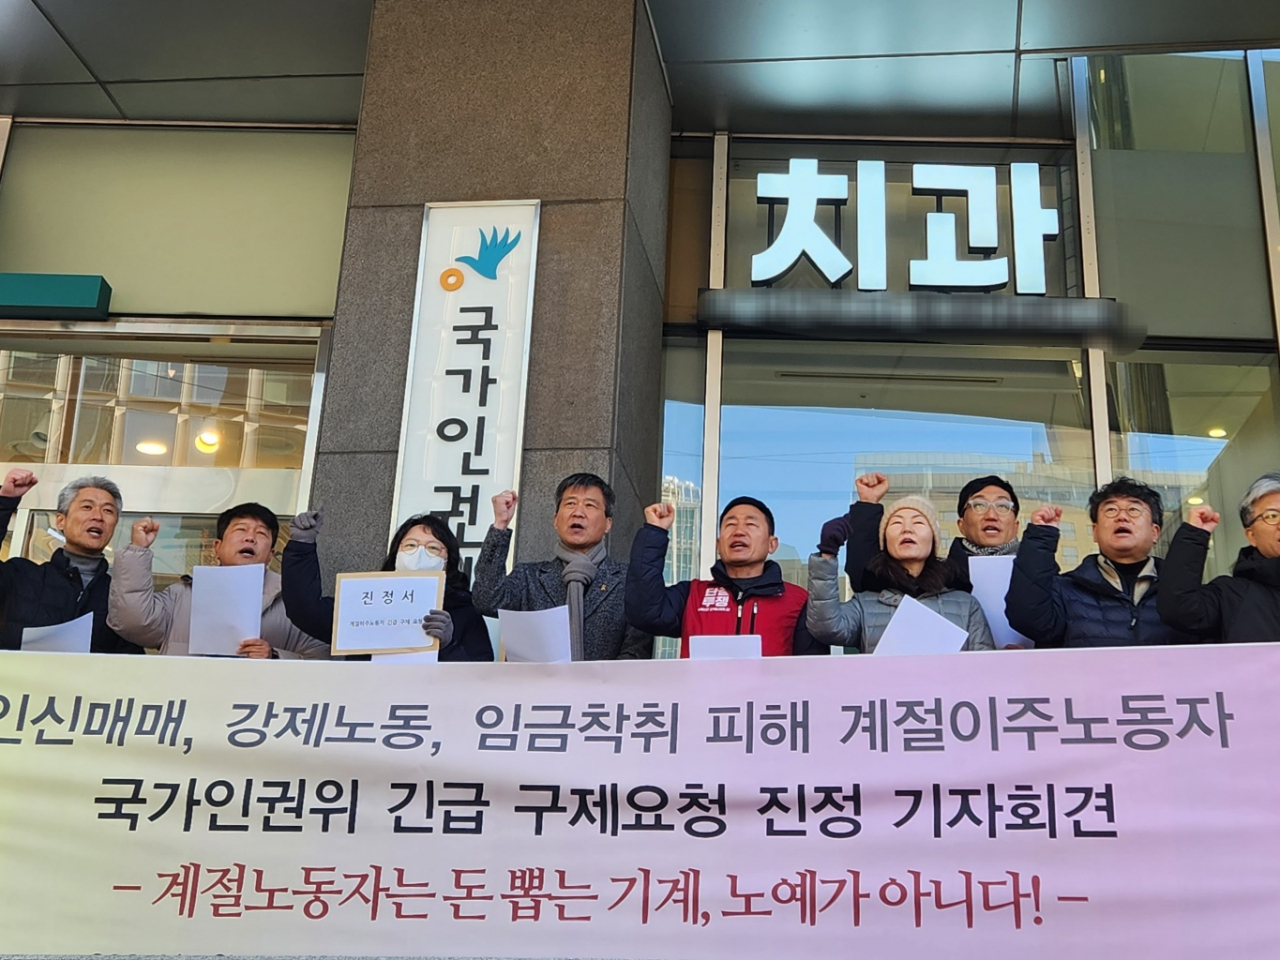 Members of organizations that advocate for migrants' human and labor rights hold a press conference outside the National Human Rights Commission of Korea on Jan. 15, where they filed a petition calling for urgent action on behalf of seasonal migrant workers in Korea. (Newsis)